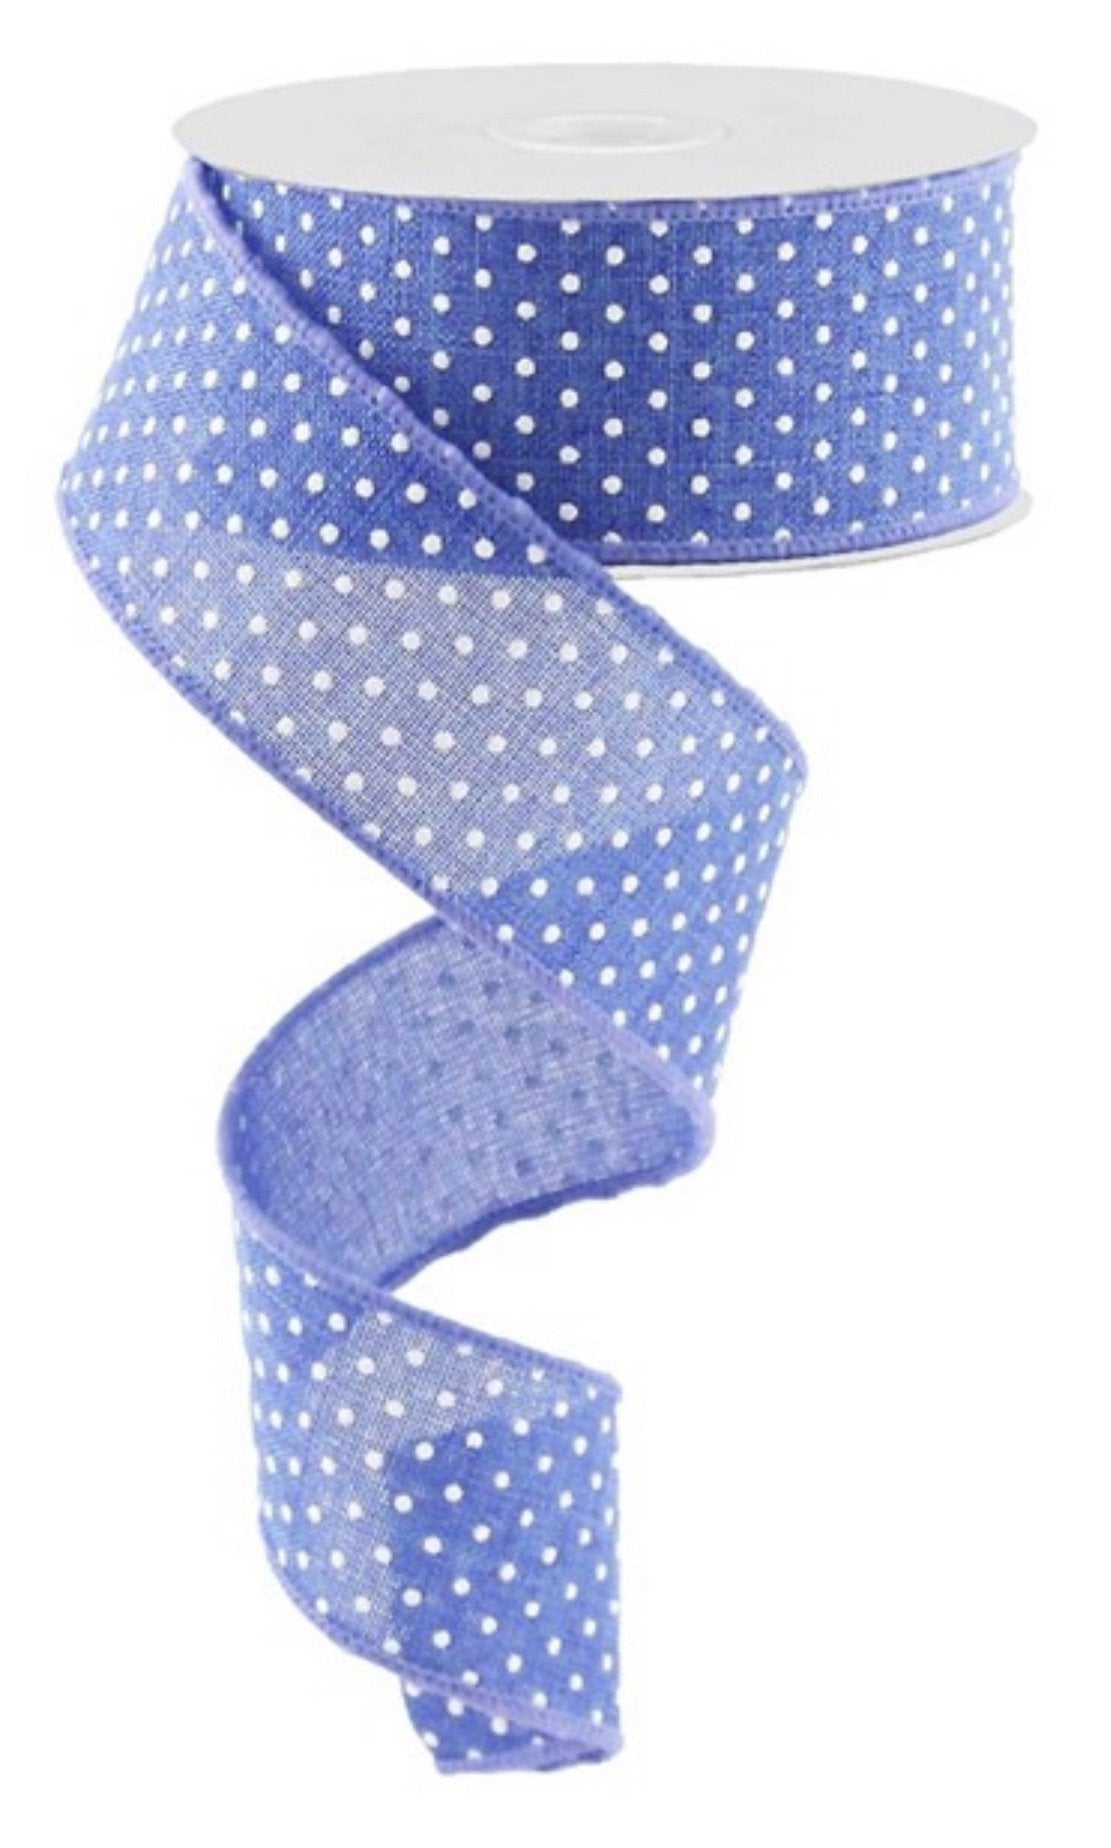 Blue with white raised dots ribbon 1.5